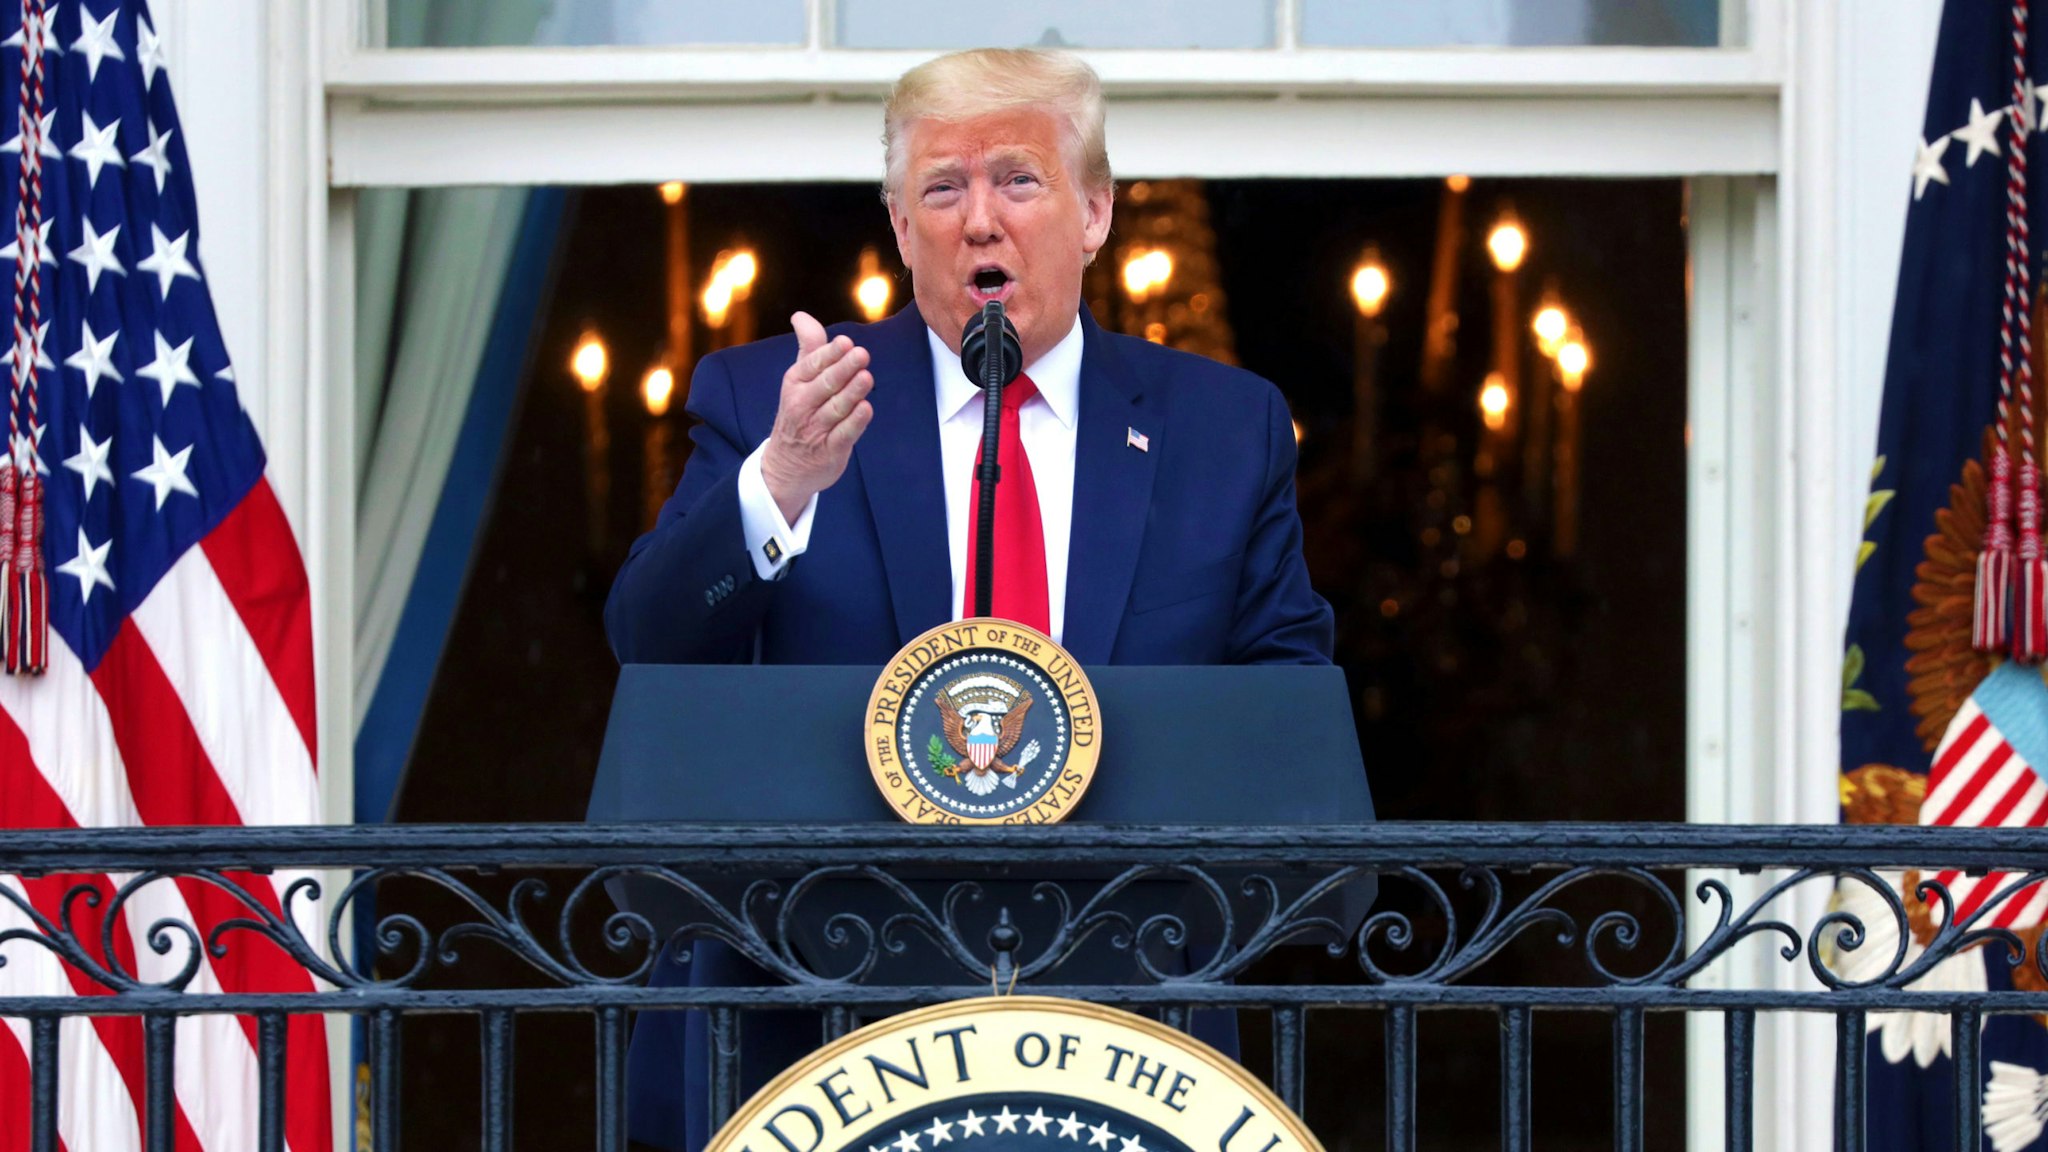 WASHINGTON, DC - MAY 22: U.S. President Donald Trump speaks from the Truman Balcony during a Rolling to Remember Ceremony: Honoring Our Nation’s Veterans and POW/MIA at the White House May 22, 2020 in Washington, DC. President Trump hosted the event to honor America’s veterans and fallen heroes.